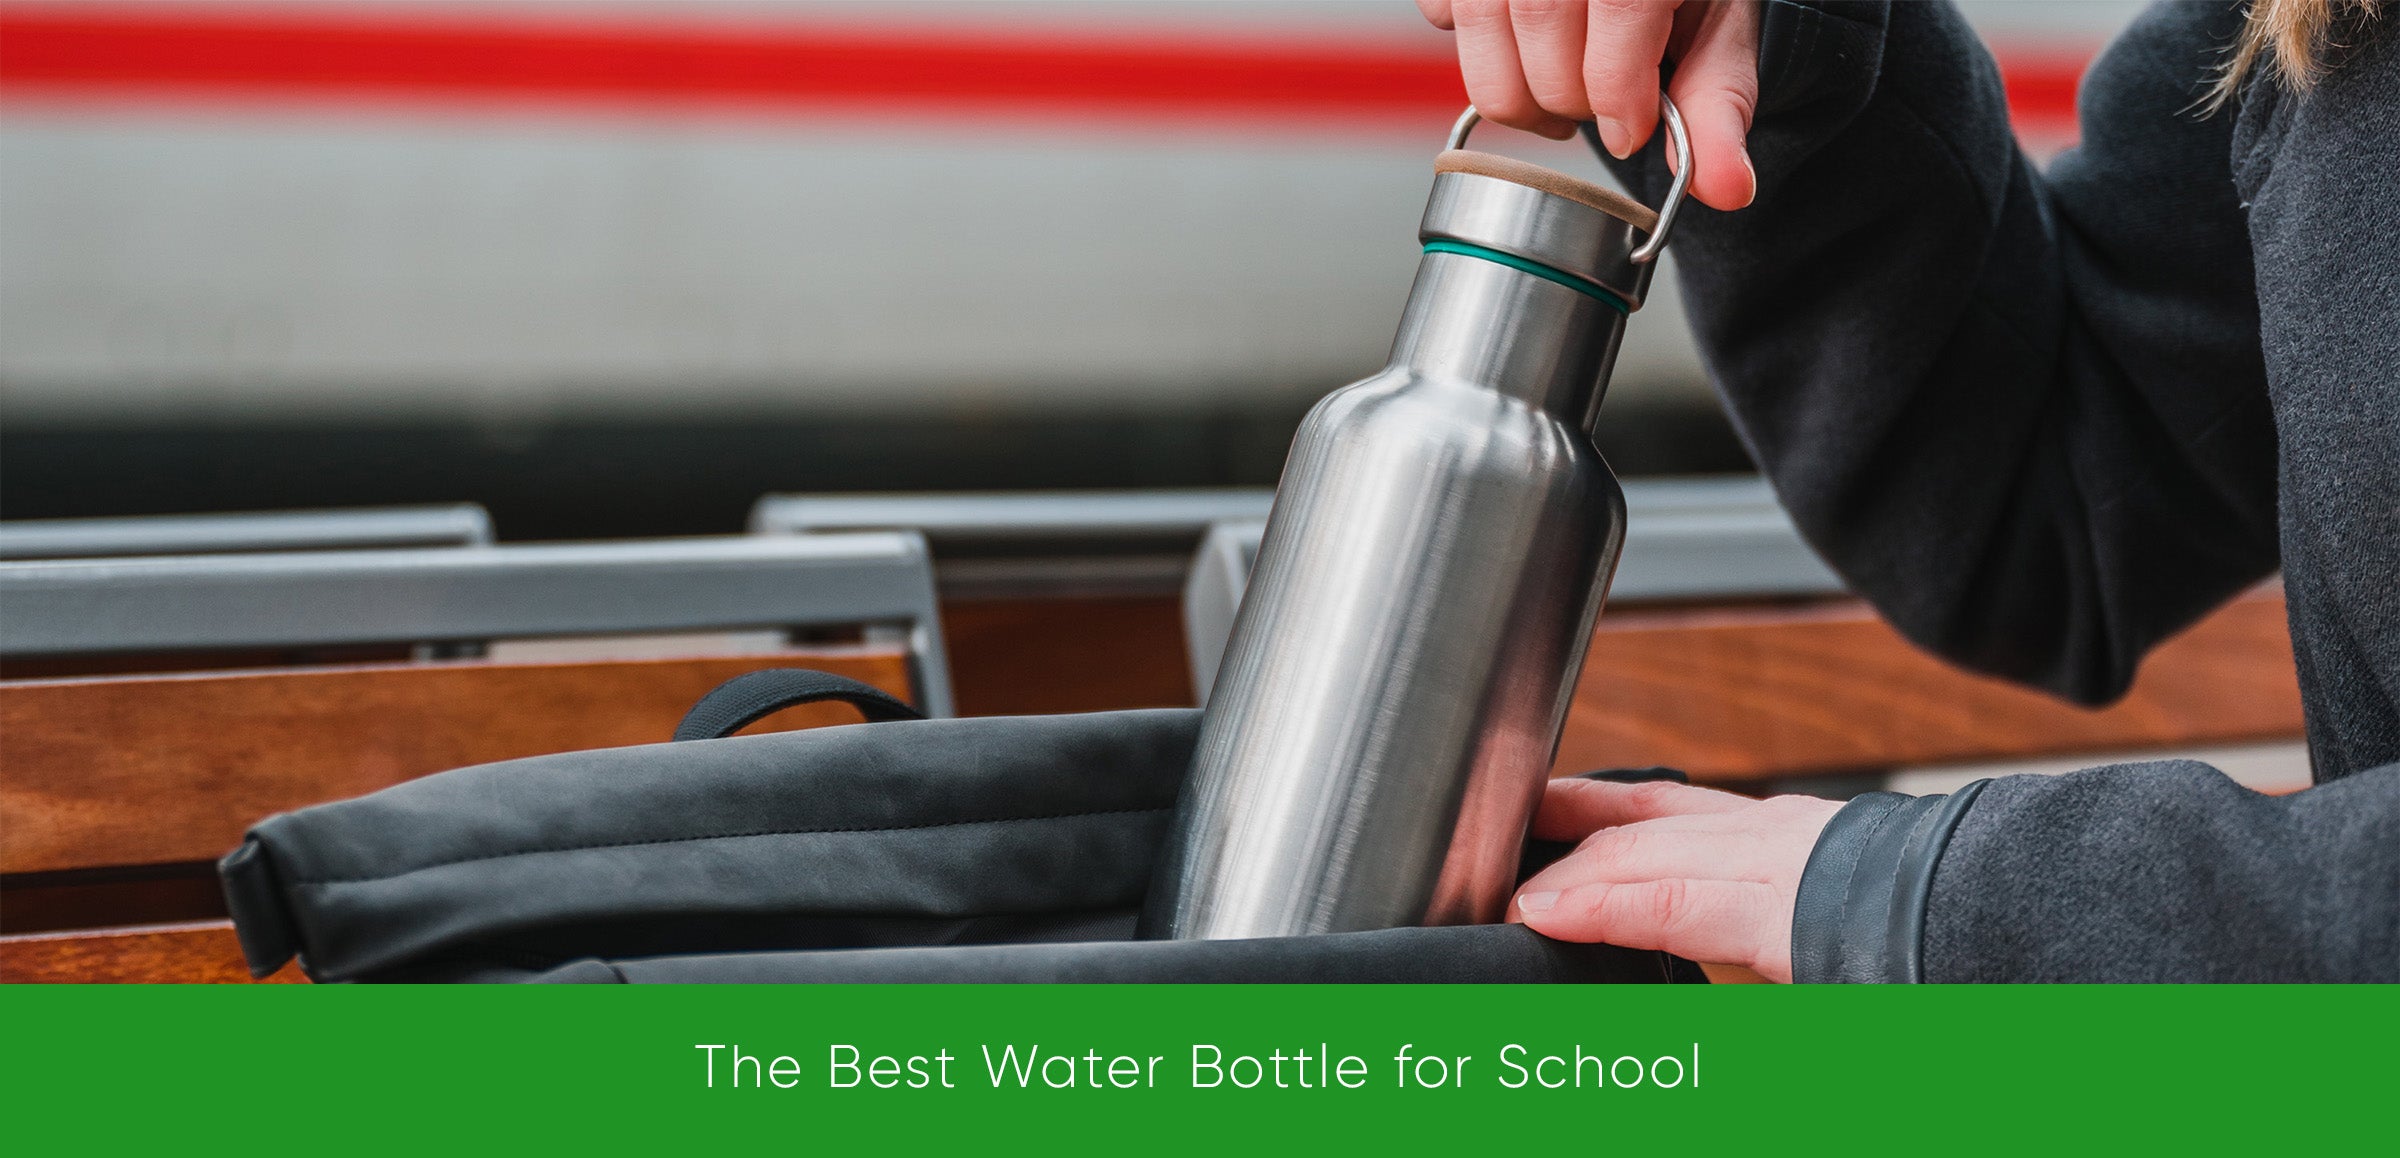 Blockhuette stainless steel water bottle being put into a backpack